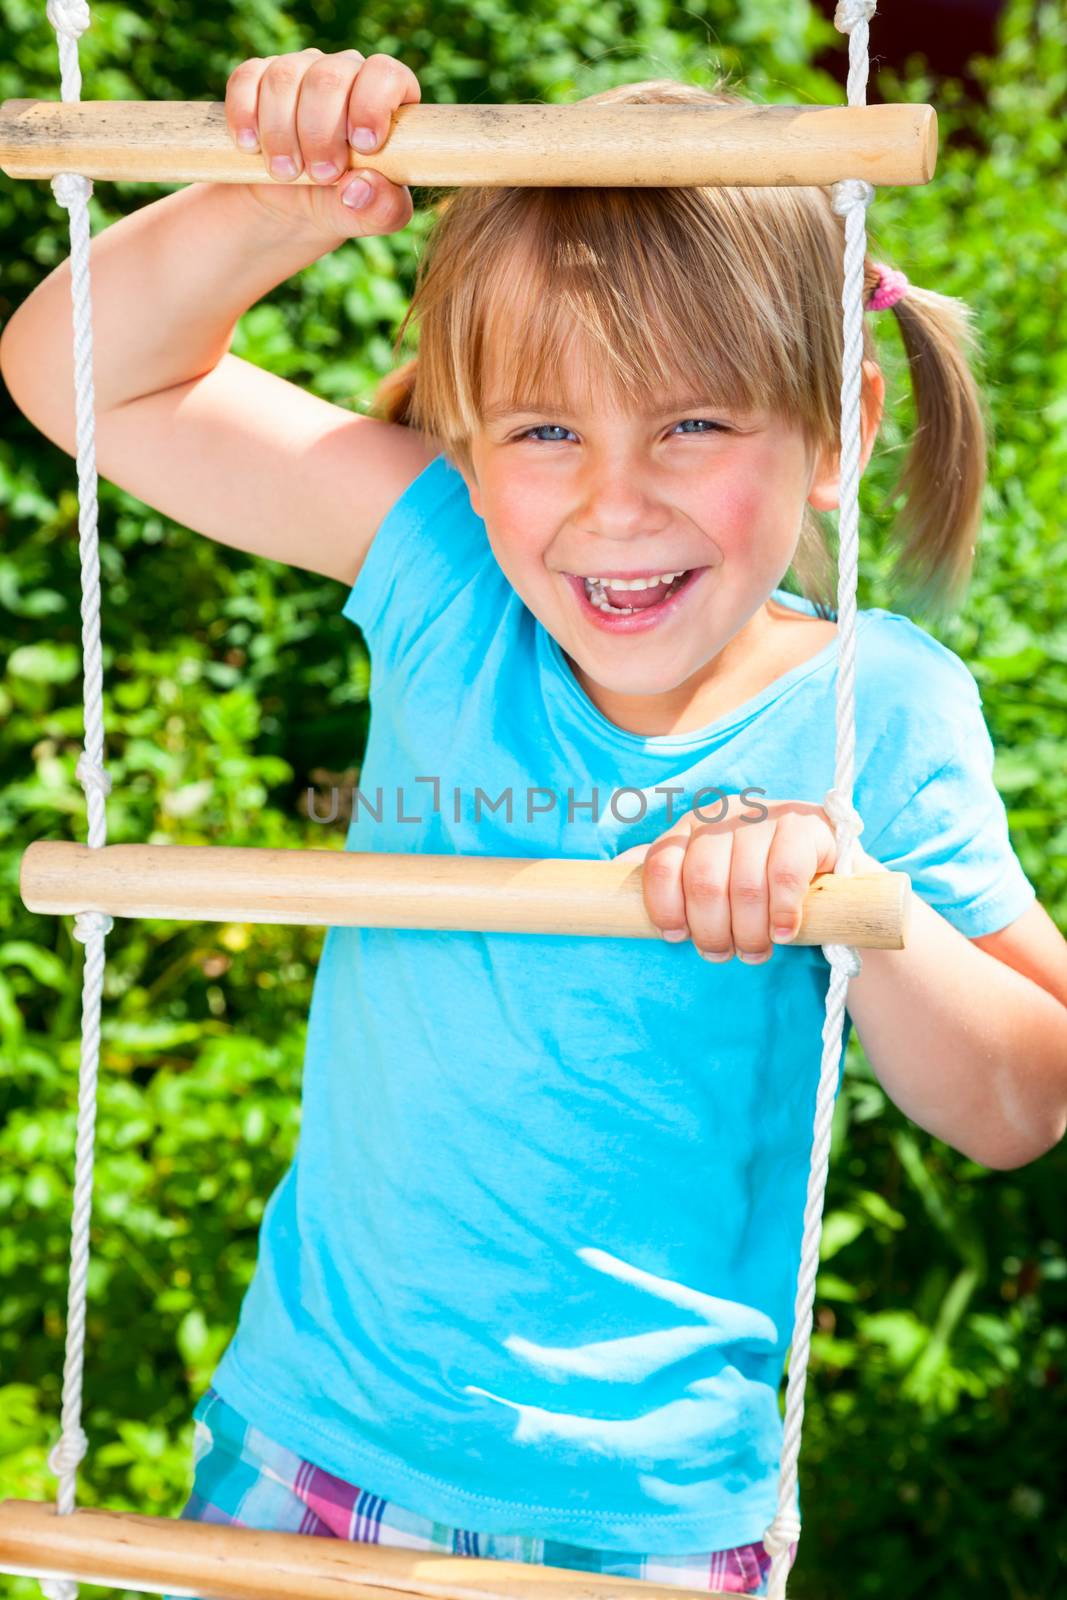 Happy child on a jungle gym by naumoid